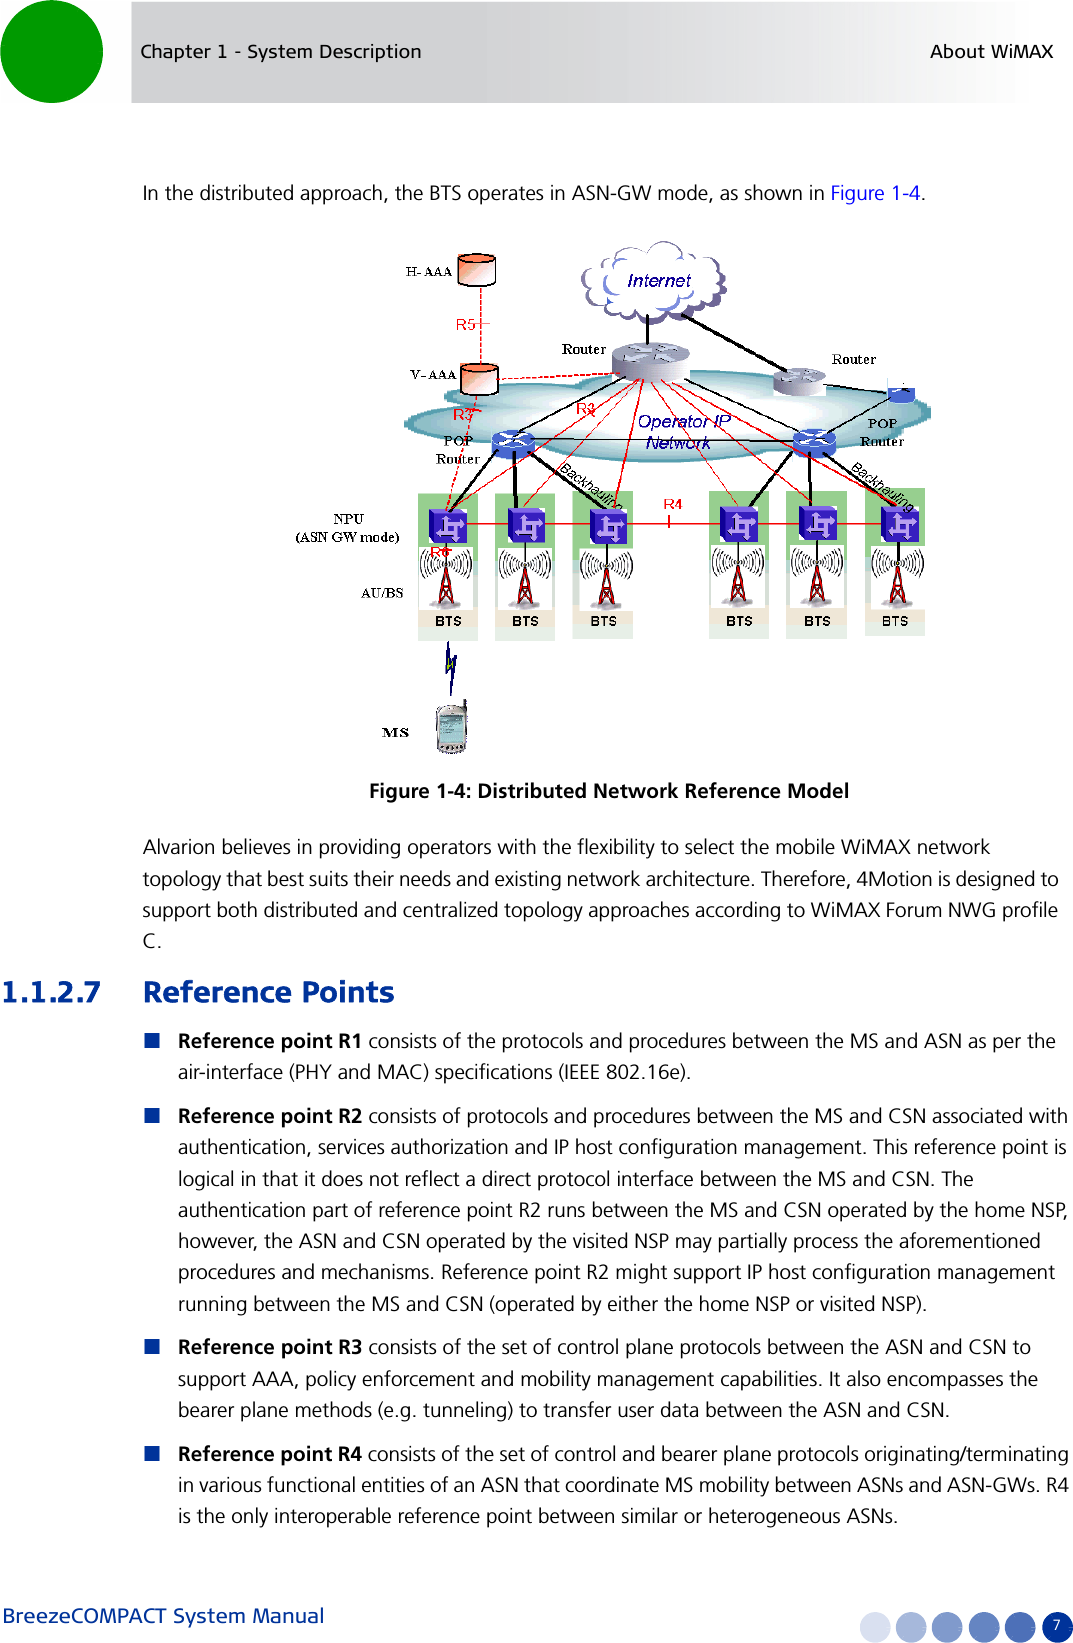 BreezeCOMPACT System Manual 7Chapter 1 - System Description About WiMAXIn the distributed approach, the BTS operates in ASN-GW mode, as shown in Figure 1-4. Alvarion believes in providing operators with the flexibility to select the mobile WiMAX network topology that best suits their needs and existing network architecture. Therefore, 4Motion is designed to support both distributed and centralized topology approaches according to WiMAX Forum NWG profile C.1.1.2.7 Reference PointsReference point R1 consists of the protocols and procedures between the MS and ASN as per the air-interface (PHY and MAC) specifications (IEEE 802.16e).Reference point R2 consists of protocols and procedures between the MS and CSN associated with authentication, services authorization and IP host configuration management. This reference point is logical in that it does not reflect a direct protocol interface between the MS and CSN. The authentication part of reference point R2 runs between the MS and CSN operated by the home NSP, however, the ASN and CSN operated by the visited NSP may partially process the aforementioned procedures and mechanisms. Reference point R2 might support IP host configuration management running between the MS and CSN (operated by either the home NSP or visited NSP).Reference point R3 consists of the set of control plane protocols between the ASN and CSN to support AAA, policy enforcement and mobility management capabilities. It also encompasses the bearer plane methods (e.g. tunneling) to transfer user data between the ASN and CSN.Reference point R4 consists of the set of control and bearer plane protocols originating/terminating in various functional entities of an ASN that coordinate MS mobility between ASNs and ASN-GWs. R4 is the only interoperable reference point between similar or heterogeneous ASNs.Figure 1-4: Distributed Network Reference Model